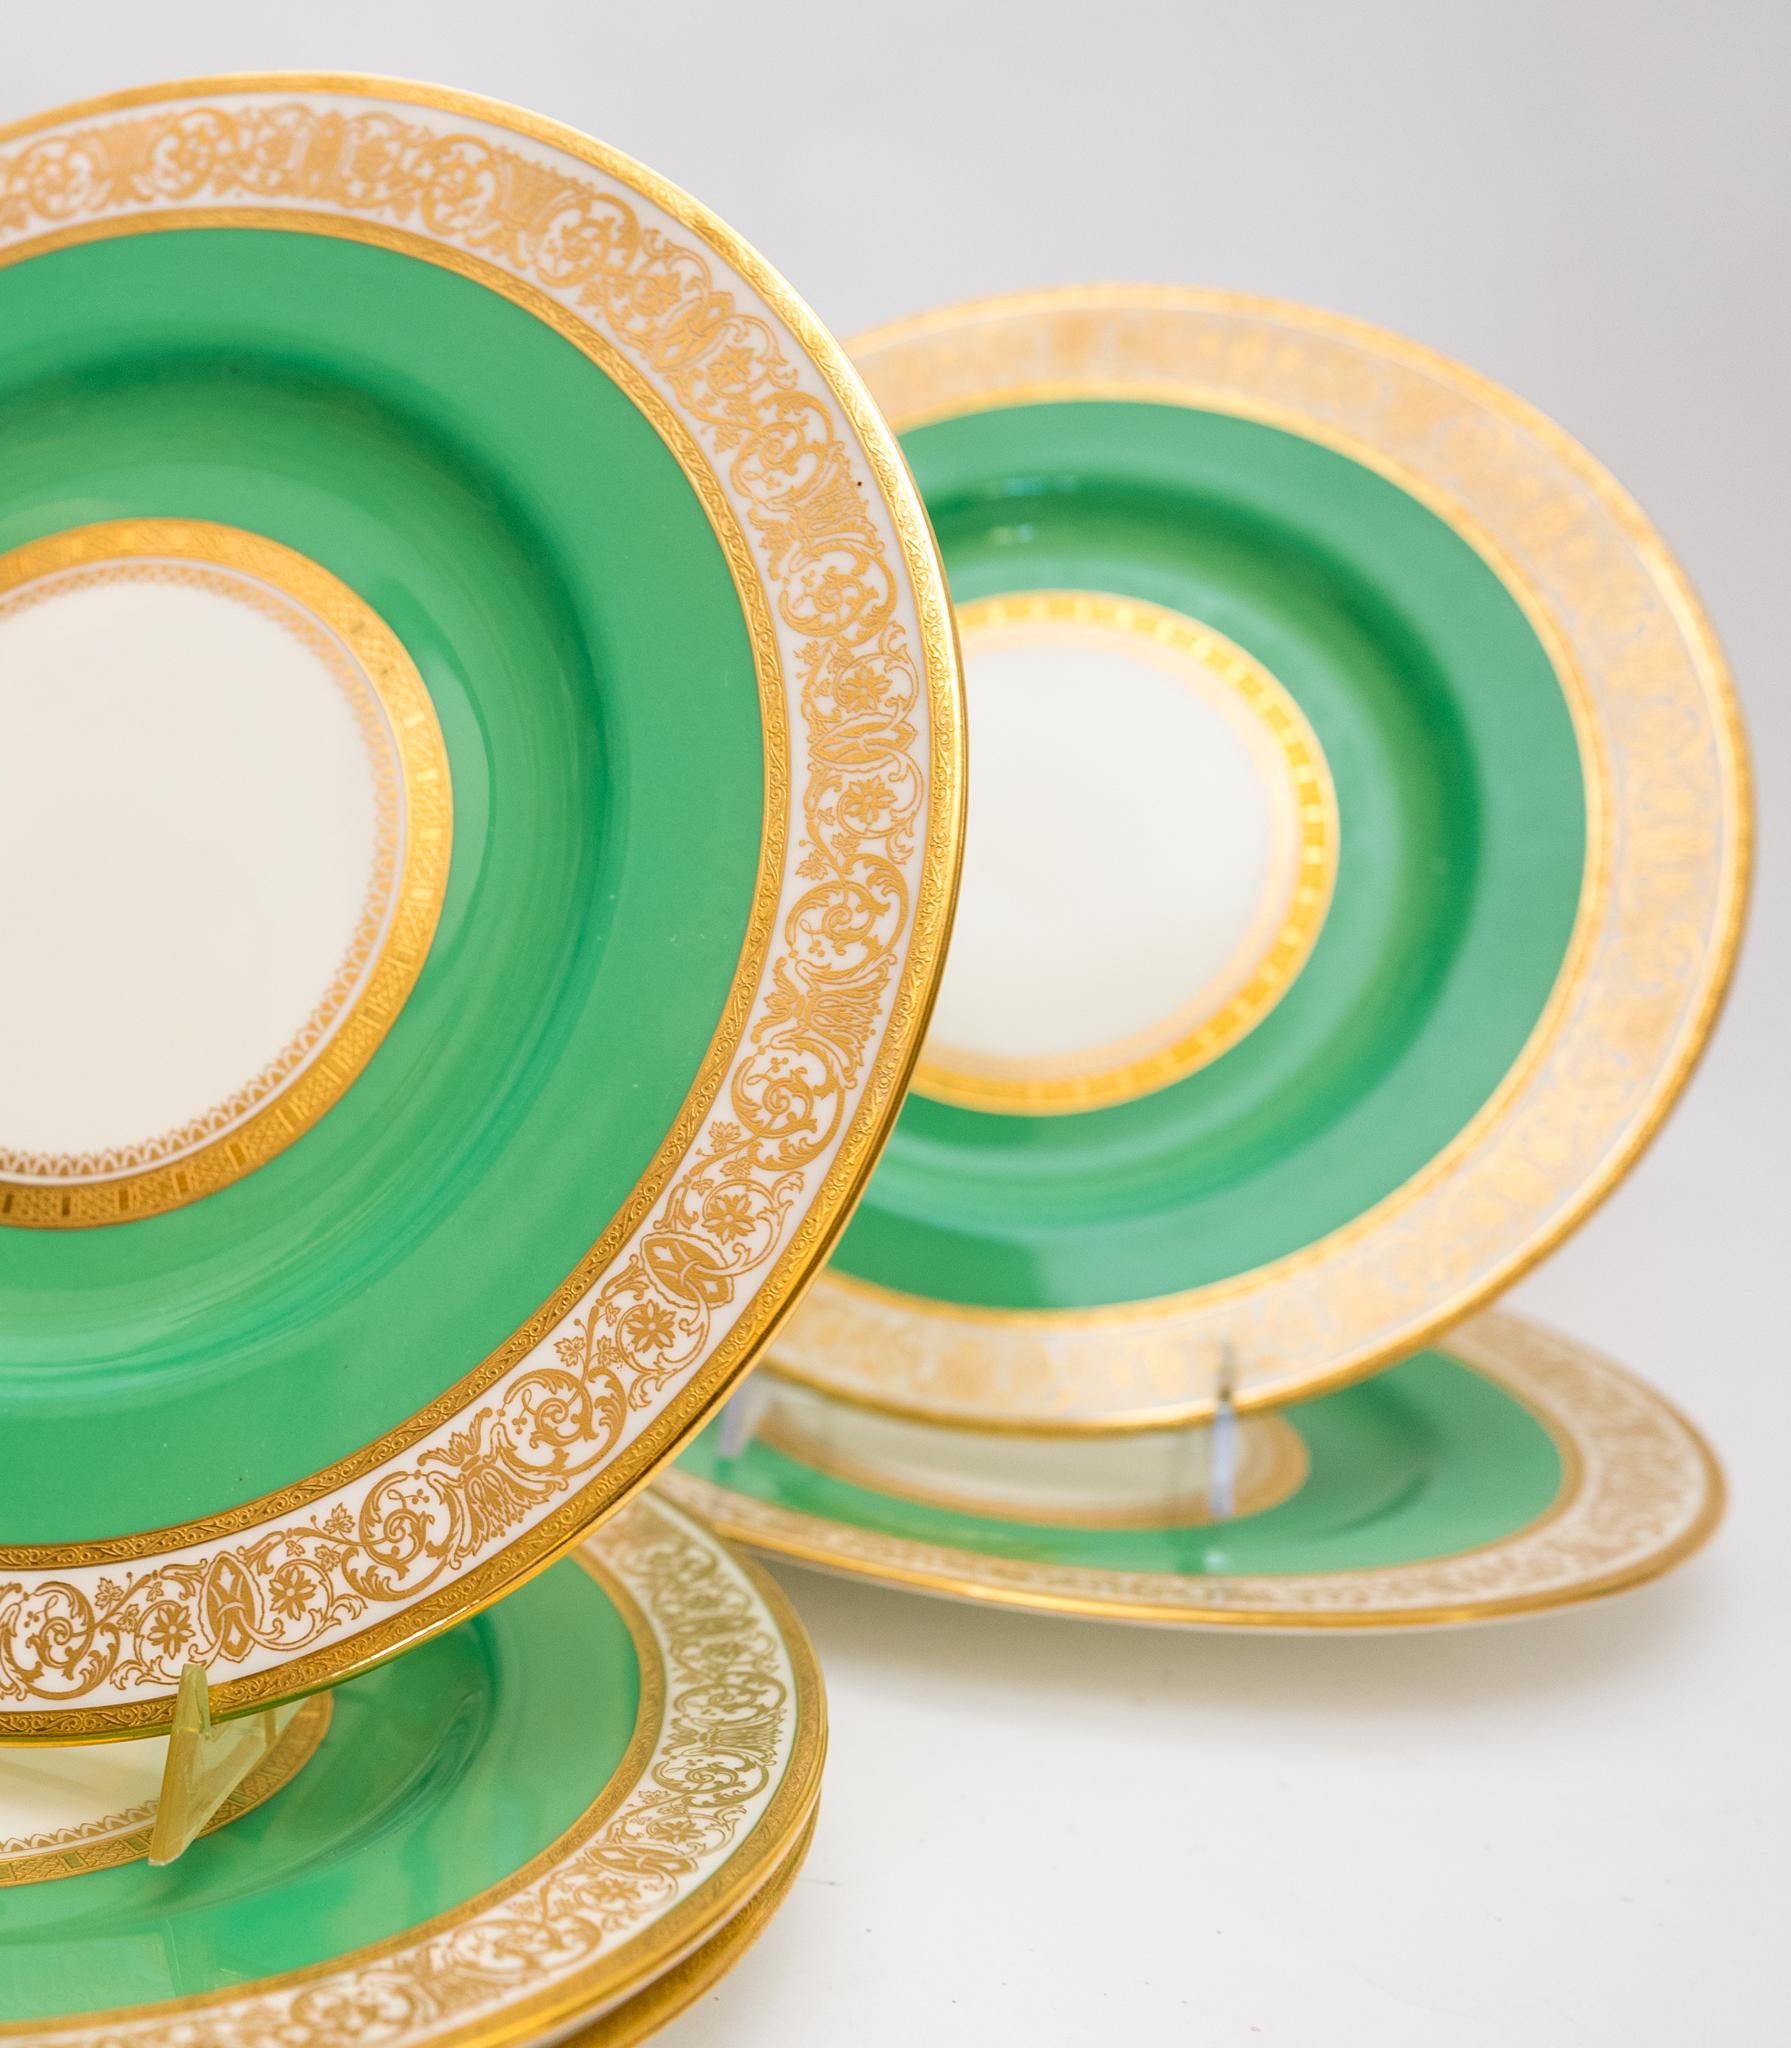 A custom ordered set of dinner plates from the Gilded Age Retailer Davis Collamore New York Circa 1905. This set of 7 plates has a nice wide green collar with triple 24 karat gold bands and finely decorated gold design. In wonderful antique